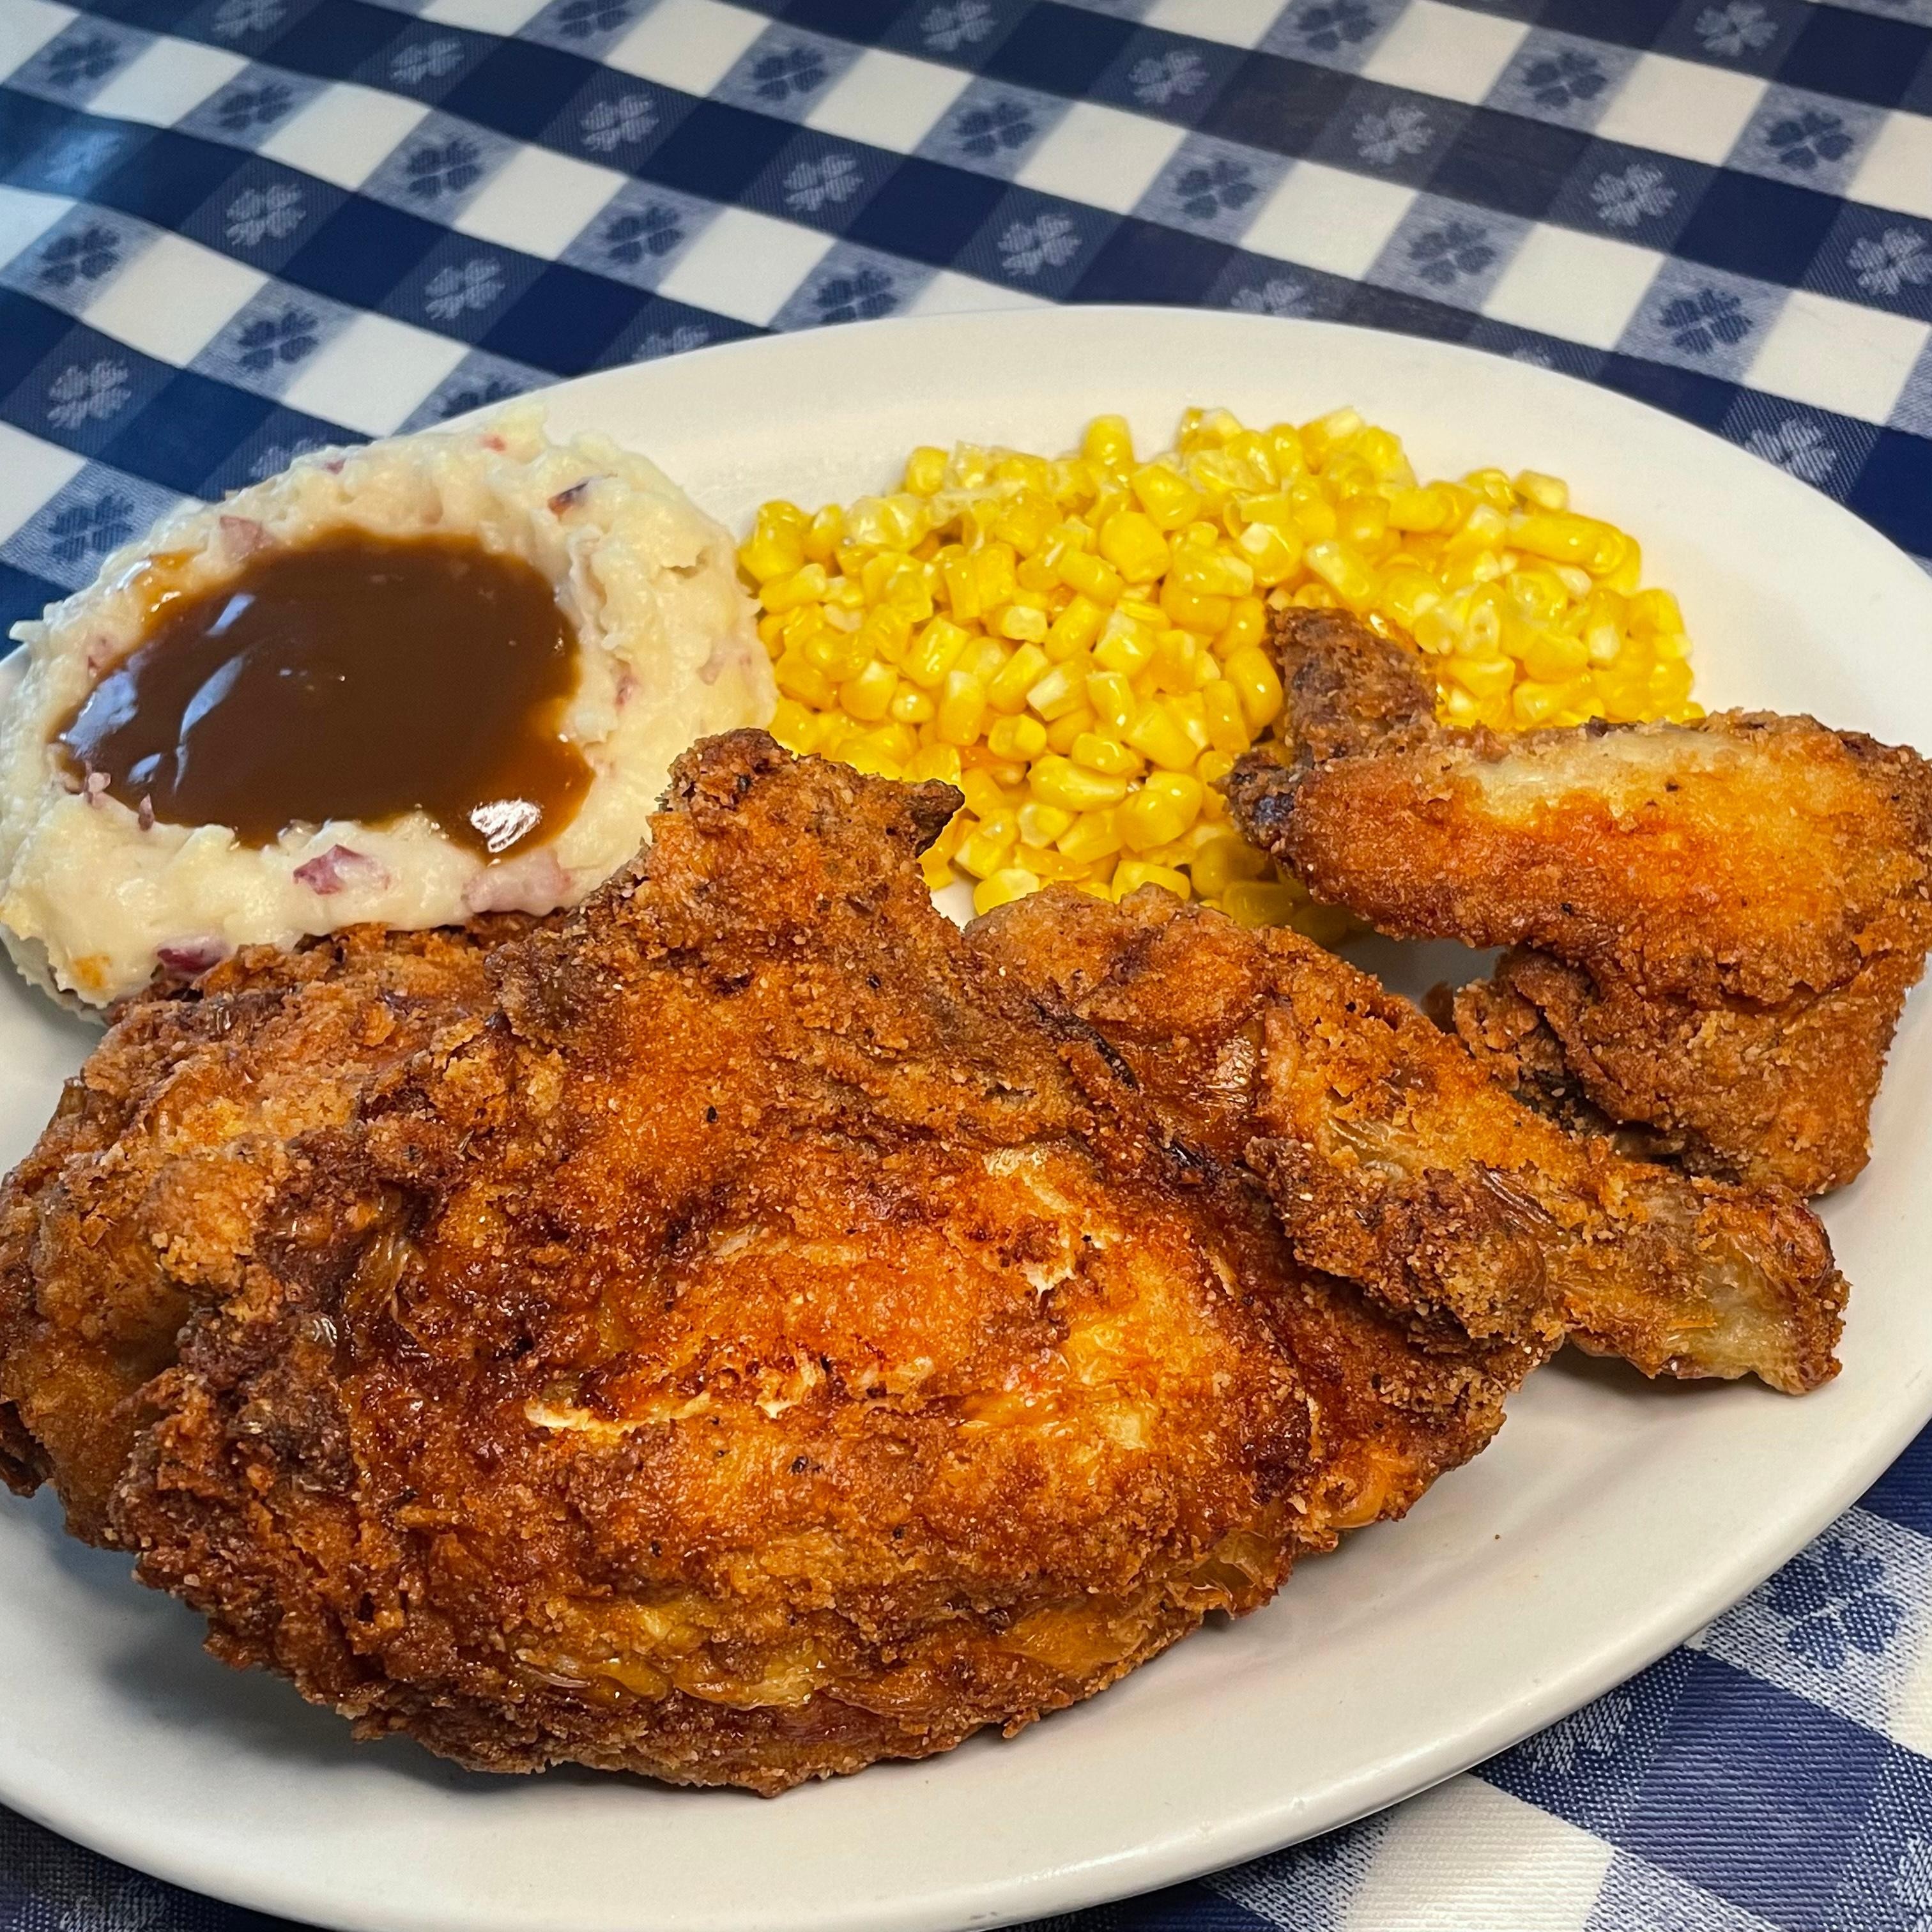 Fried Chicken 4 Pc Plate